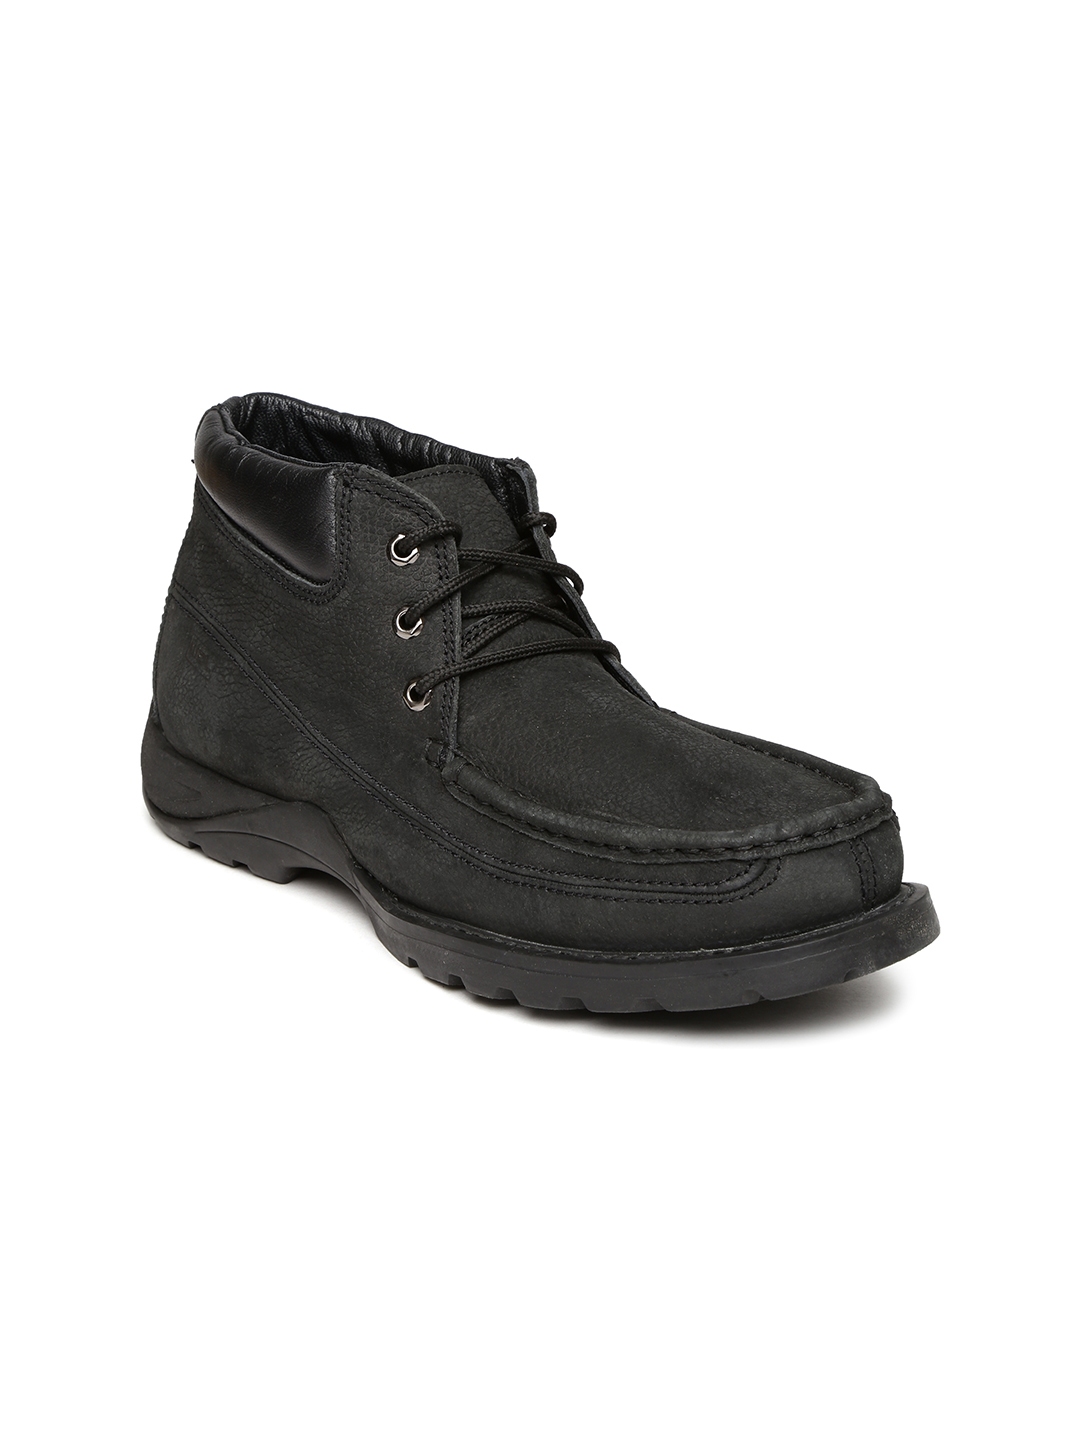 Buy Woodland Men Black Leather Boots - Boots for Men 991902 | Myntra